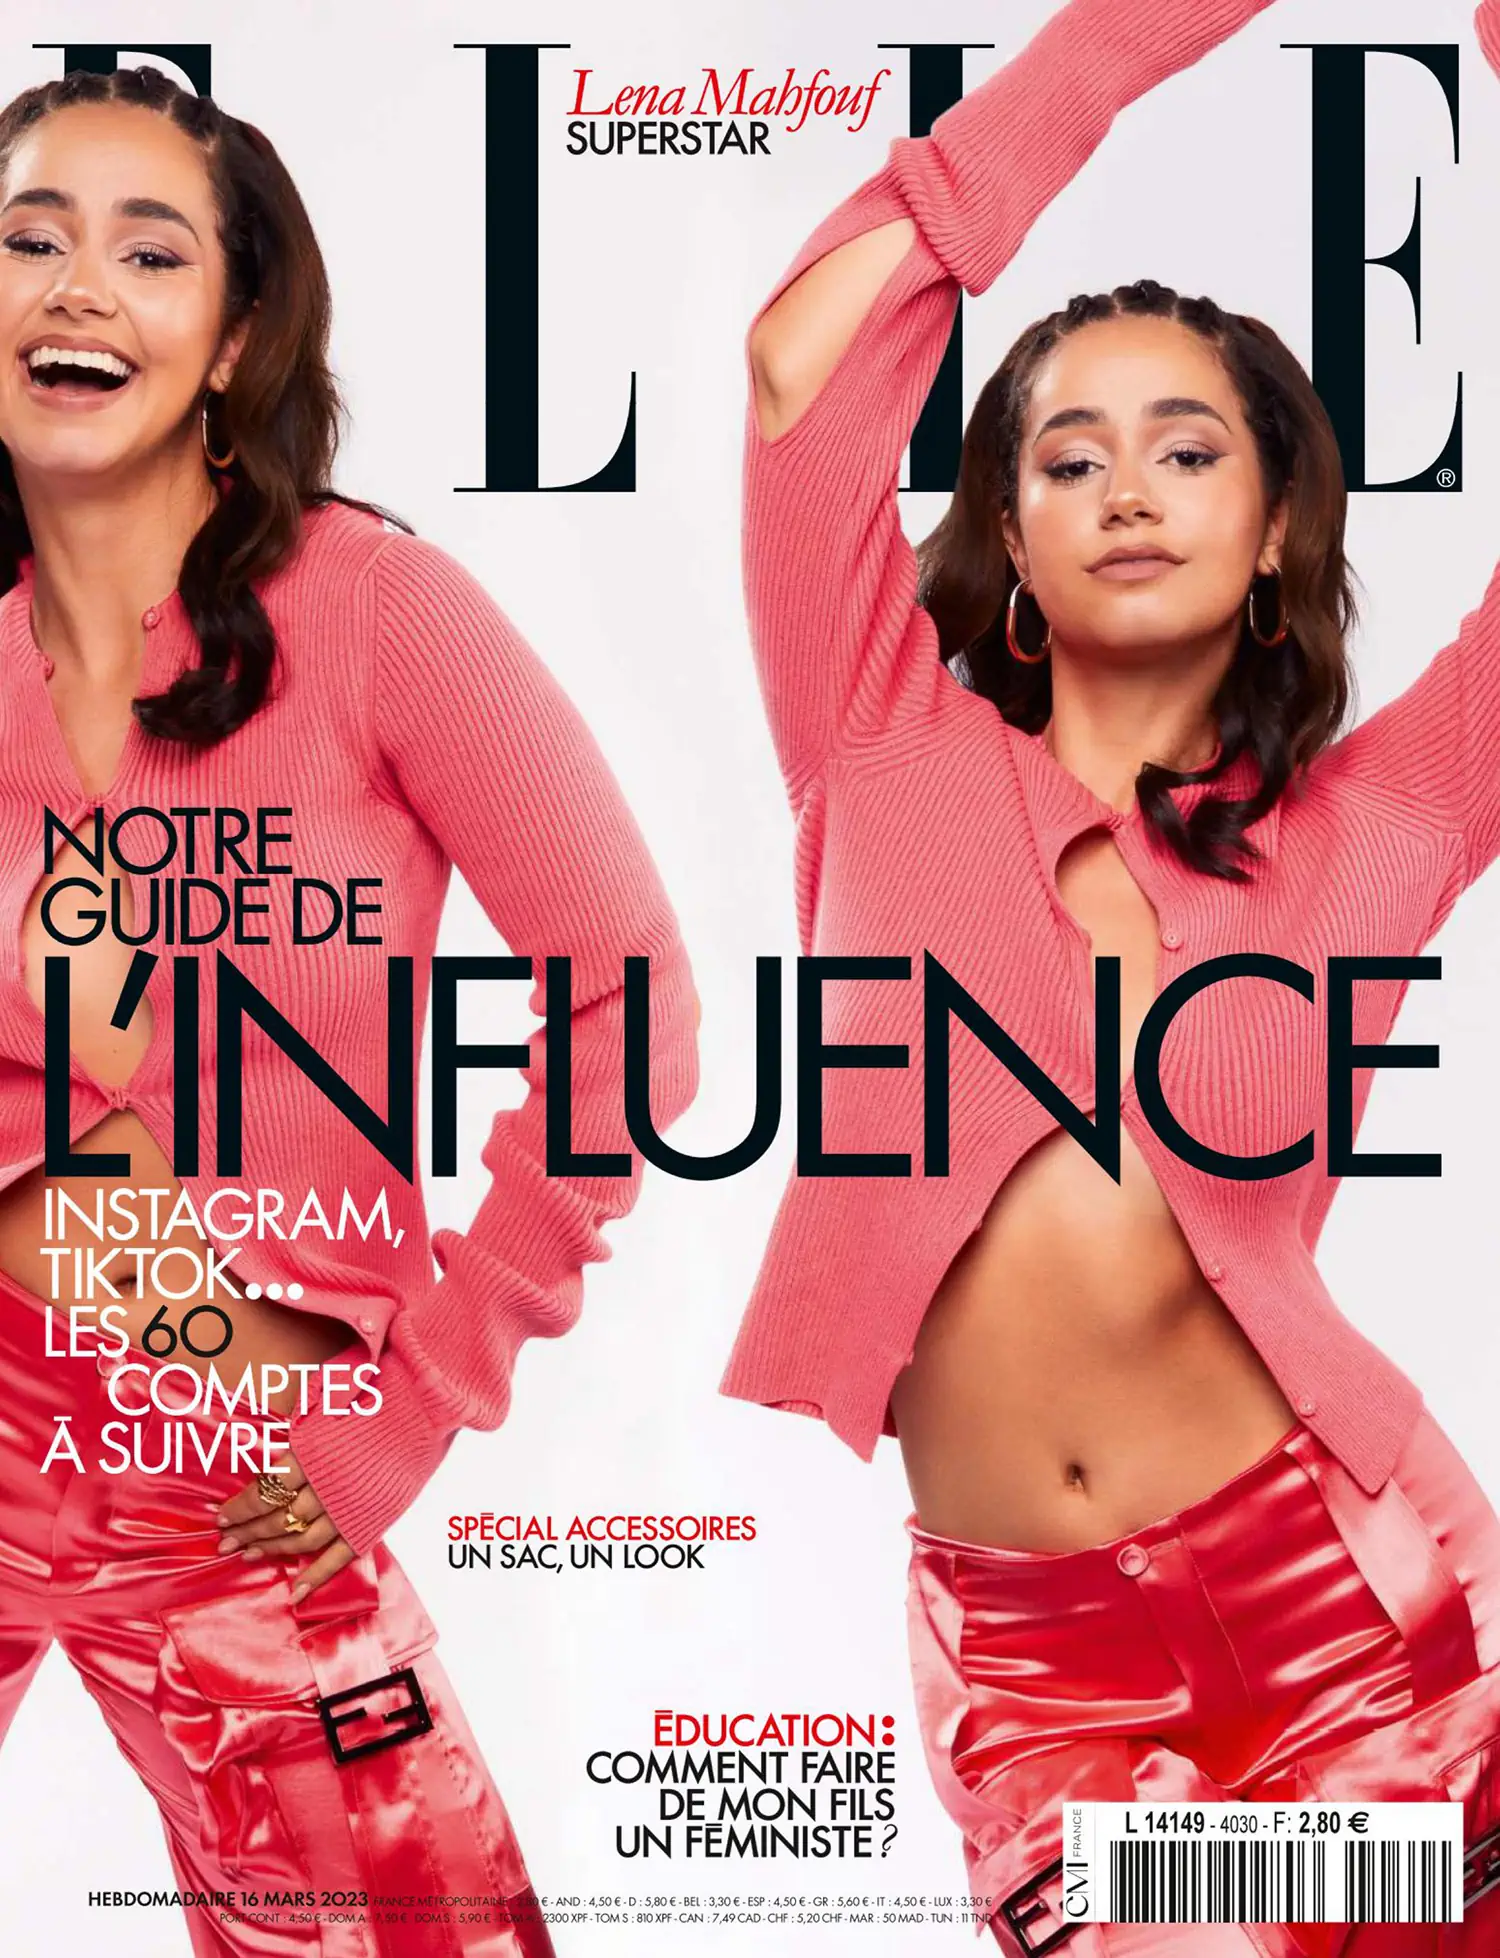 Léna Mahfouf covers Elle France March 16th, 2023 by Gilad Sasporta